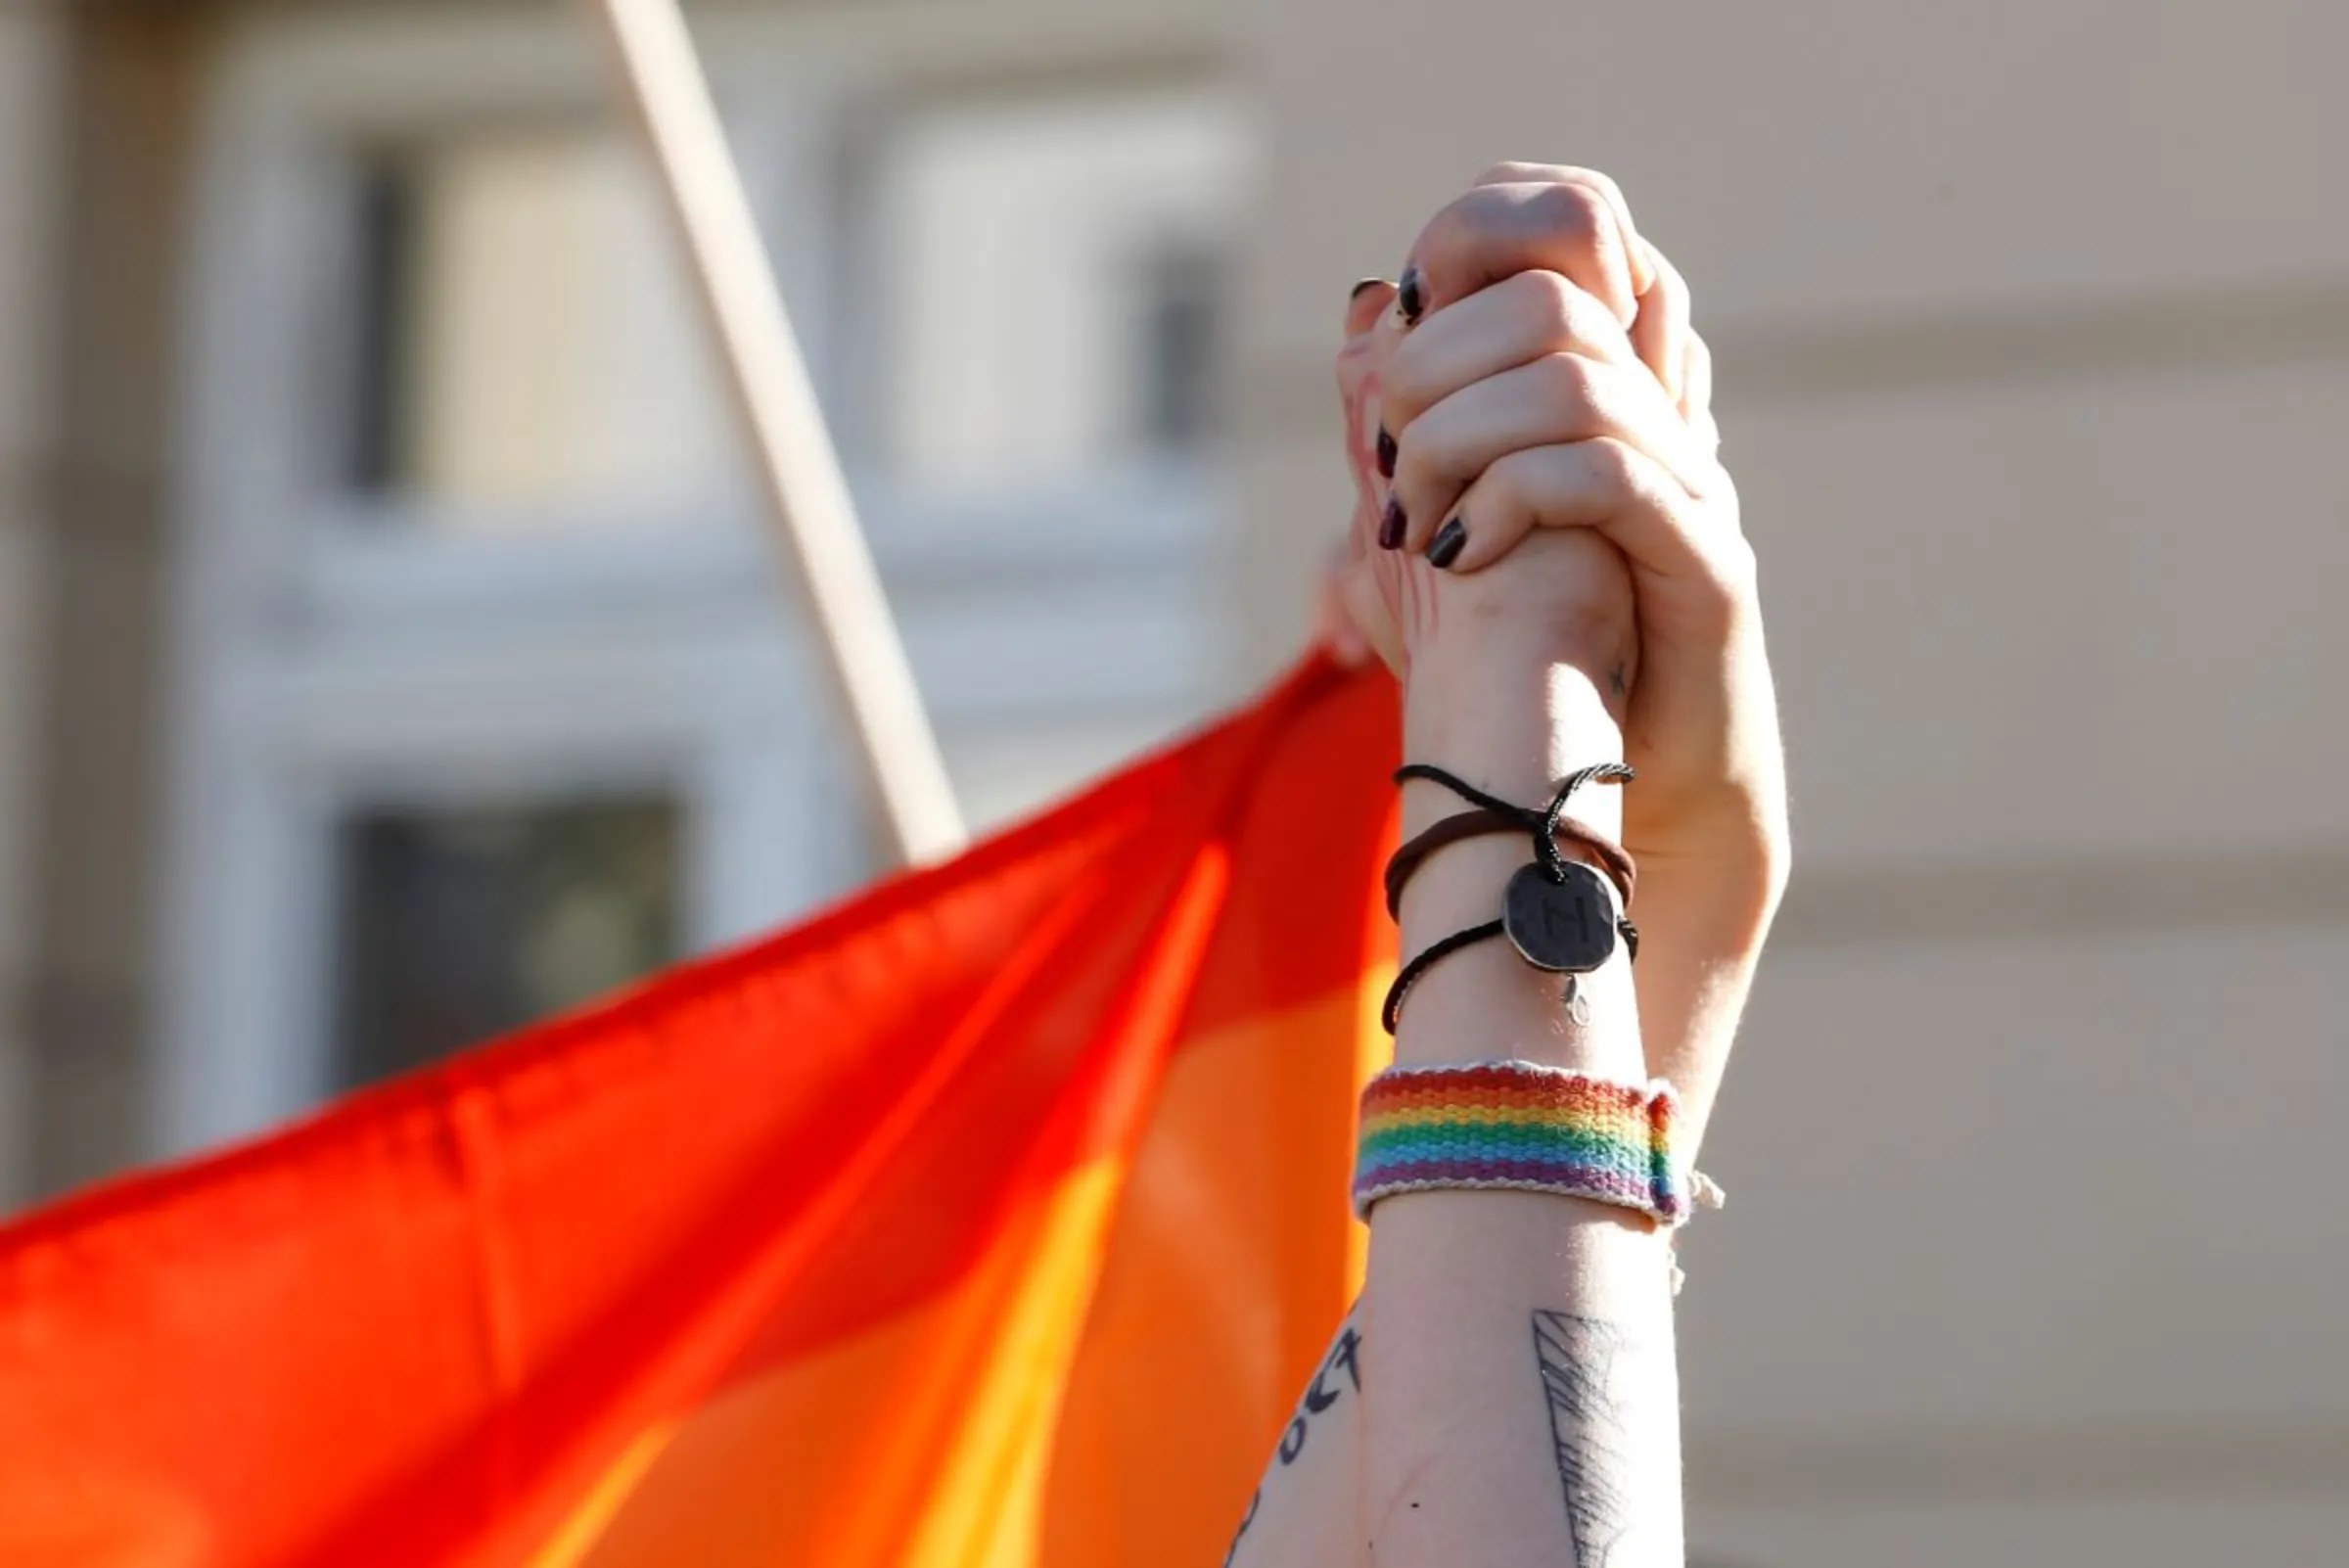 Pro-LGBT demonstrators hold hands as Polish nationalists gather to protest against what they call 'LGBT aggression' on Polish society, in Warsaw, Poland August 16, 2020. REUTERS/Kacper Pempel